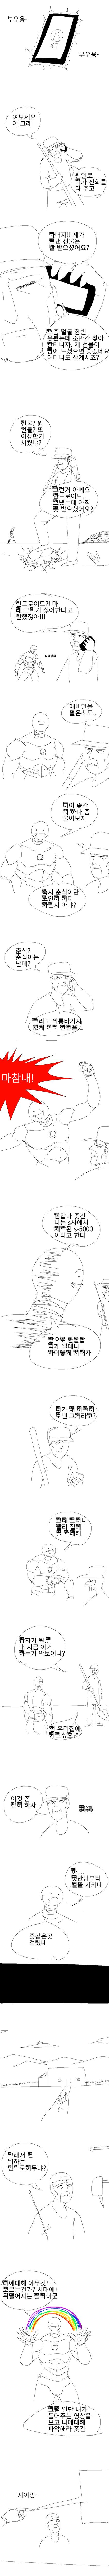 A reliable android cartoon that's good at kimchi stew.jpg